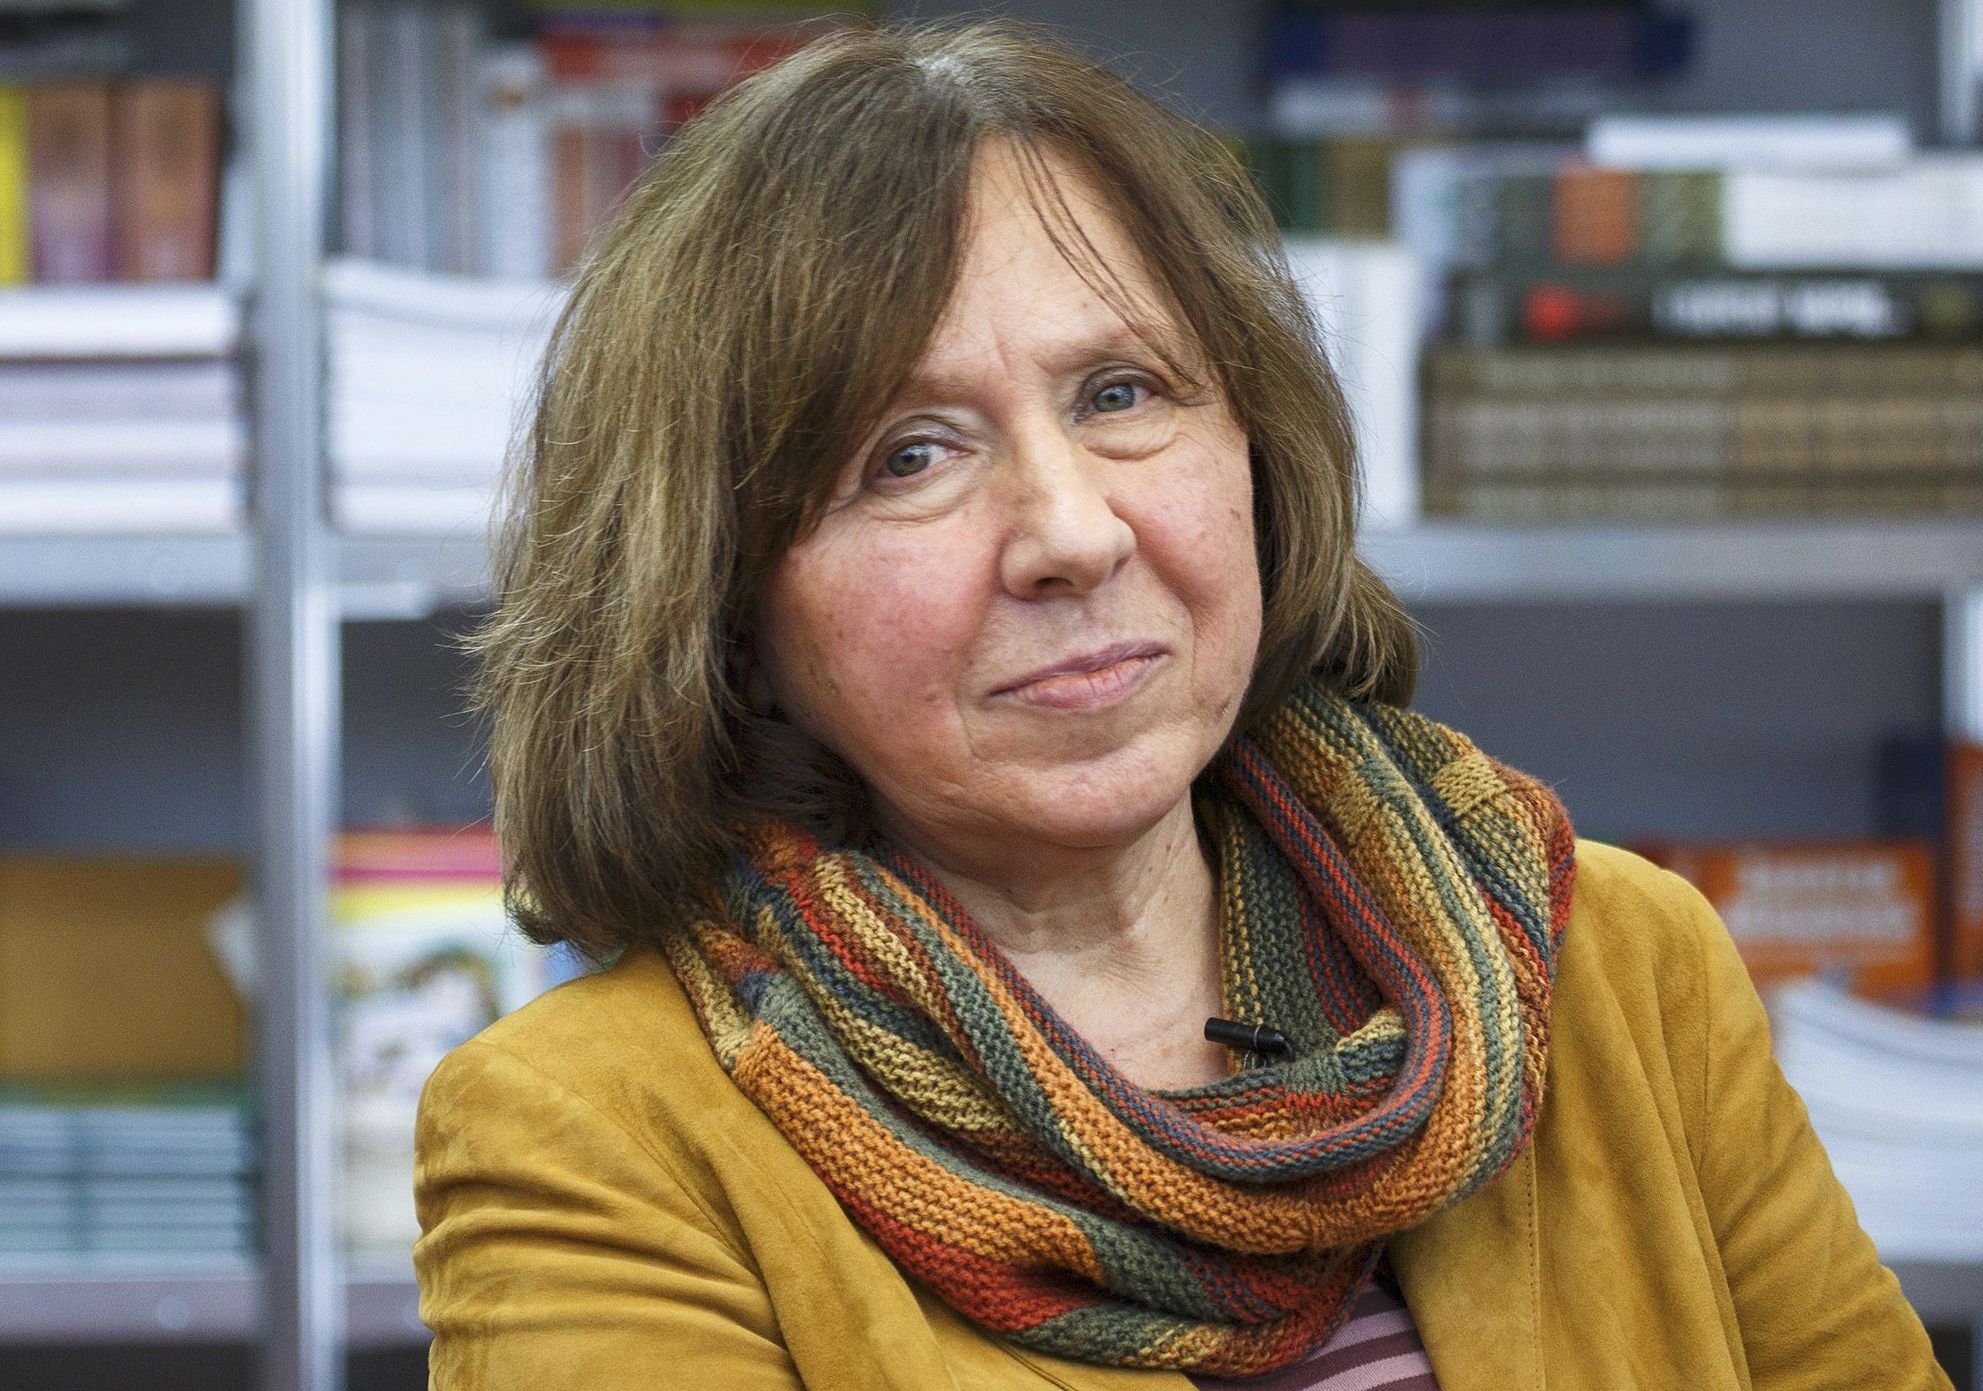 File photo of Belarussian writer Alexievich seen during a book fair in Minsk